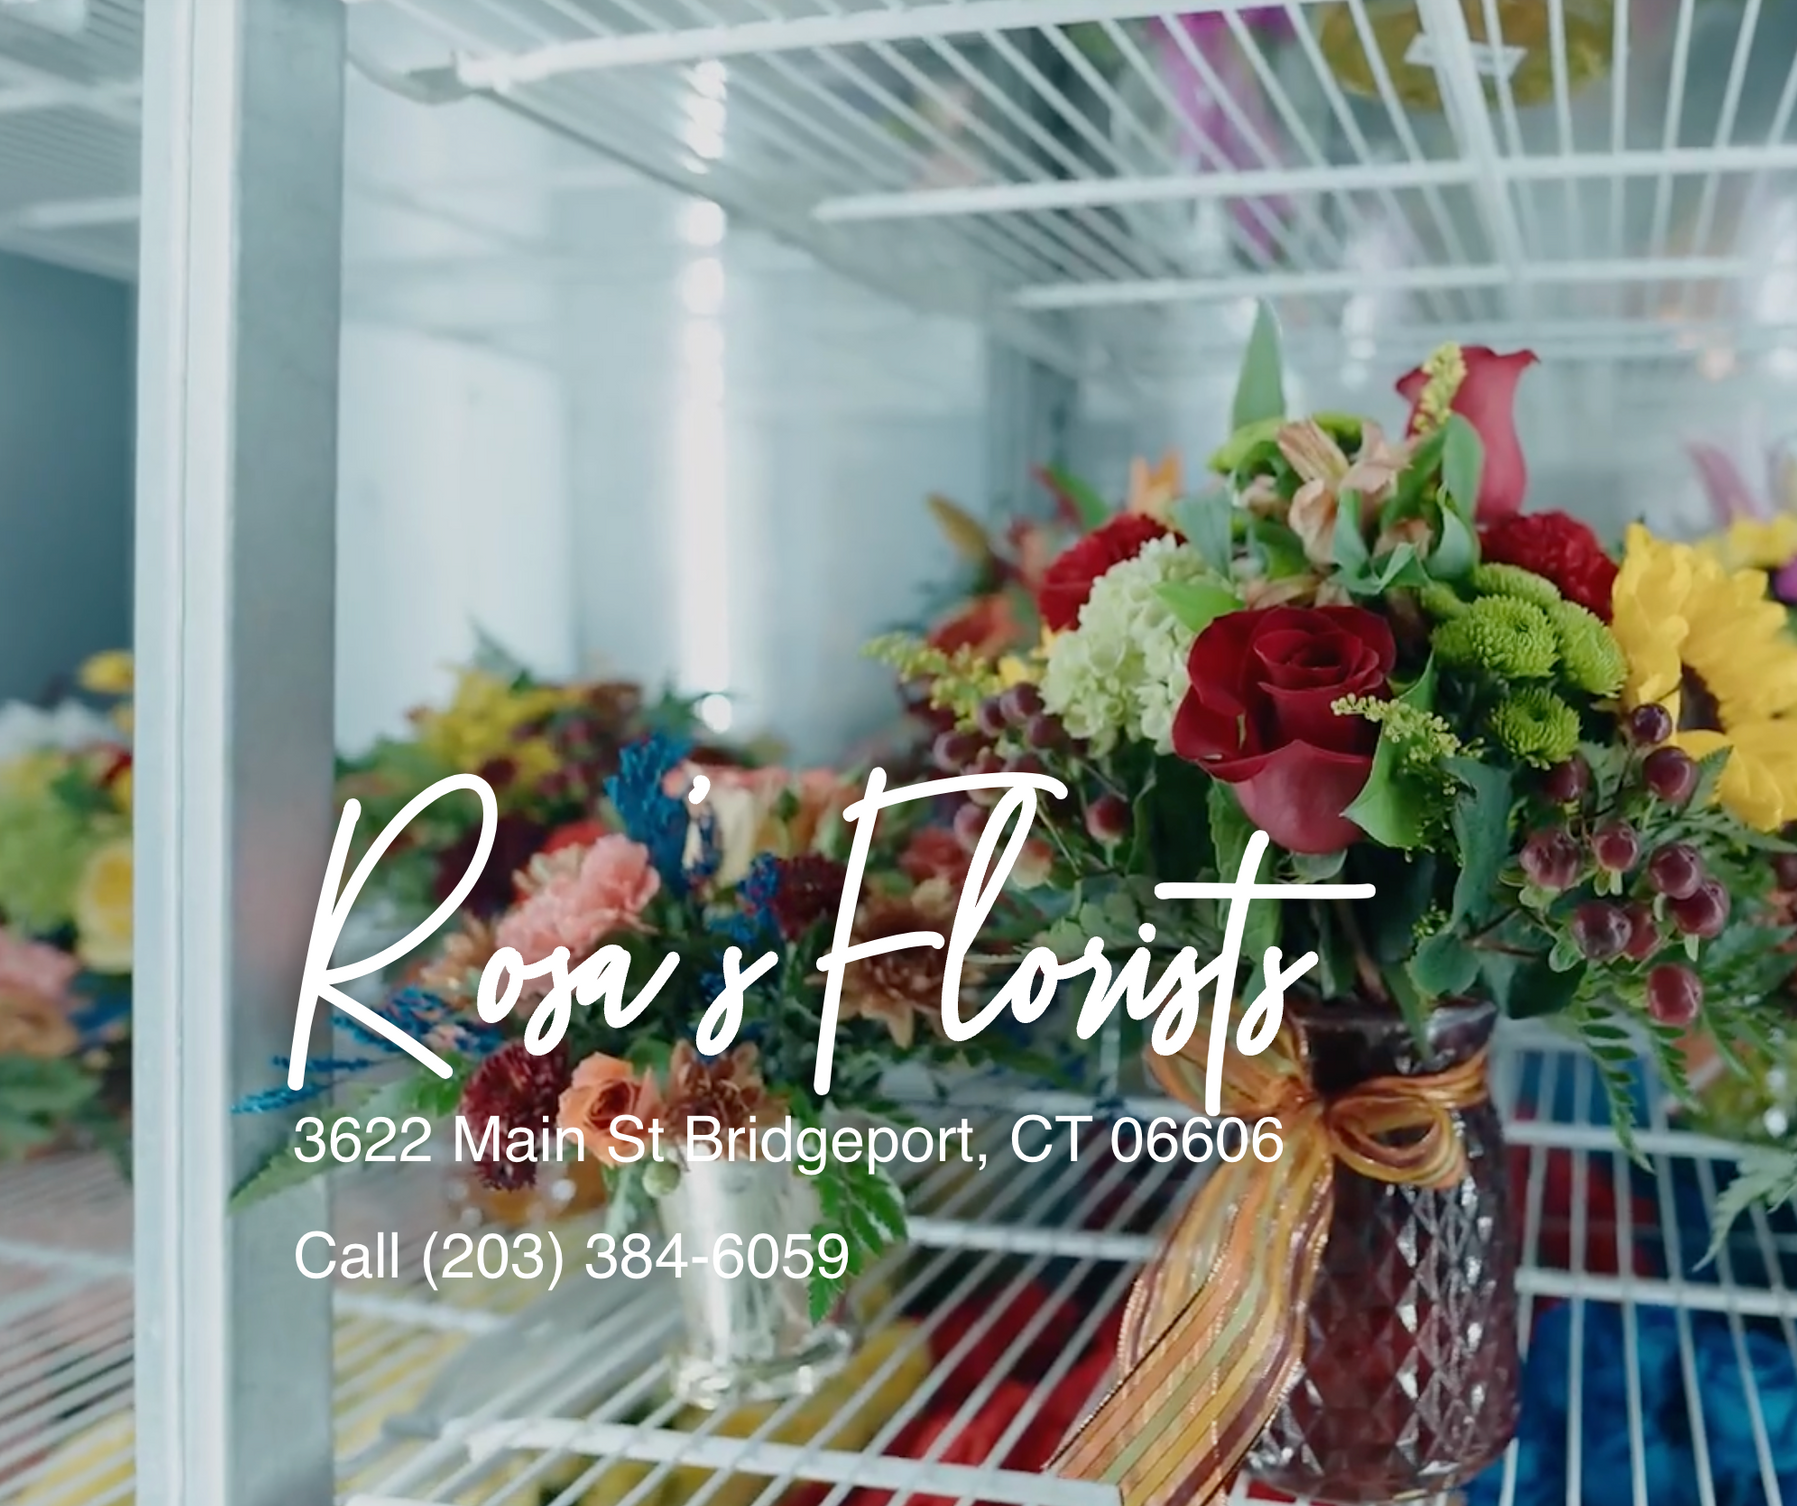 A refrigerator filled with flowers from rosa 's florists